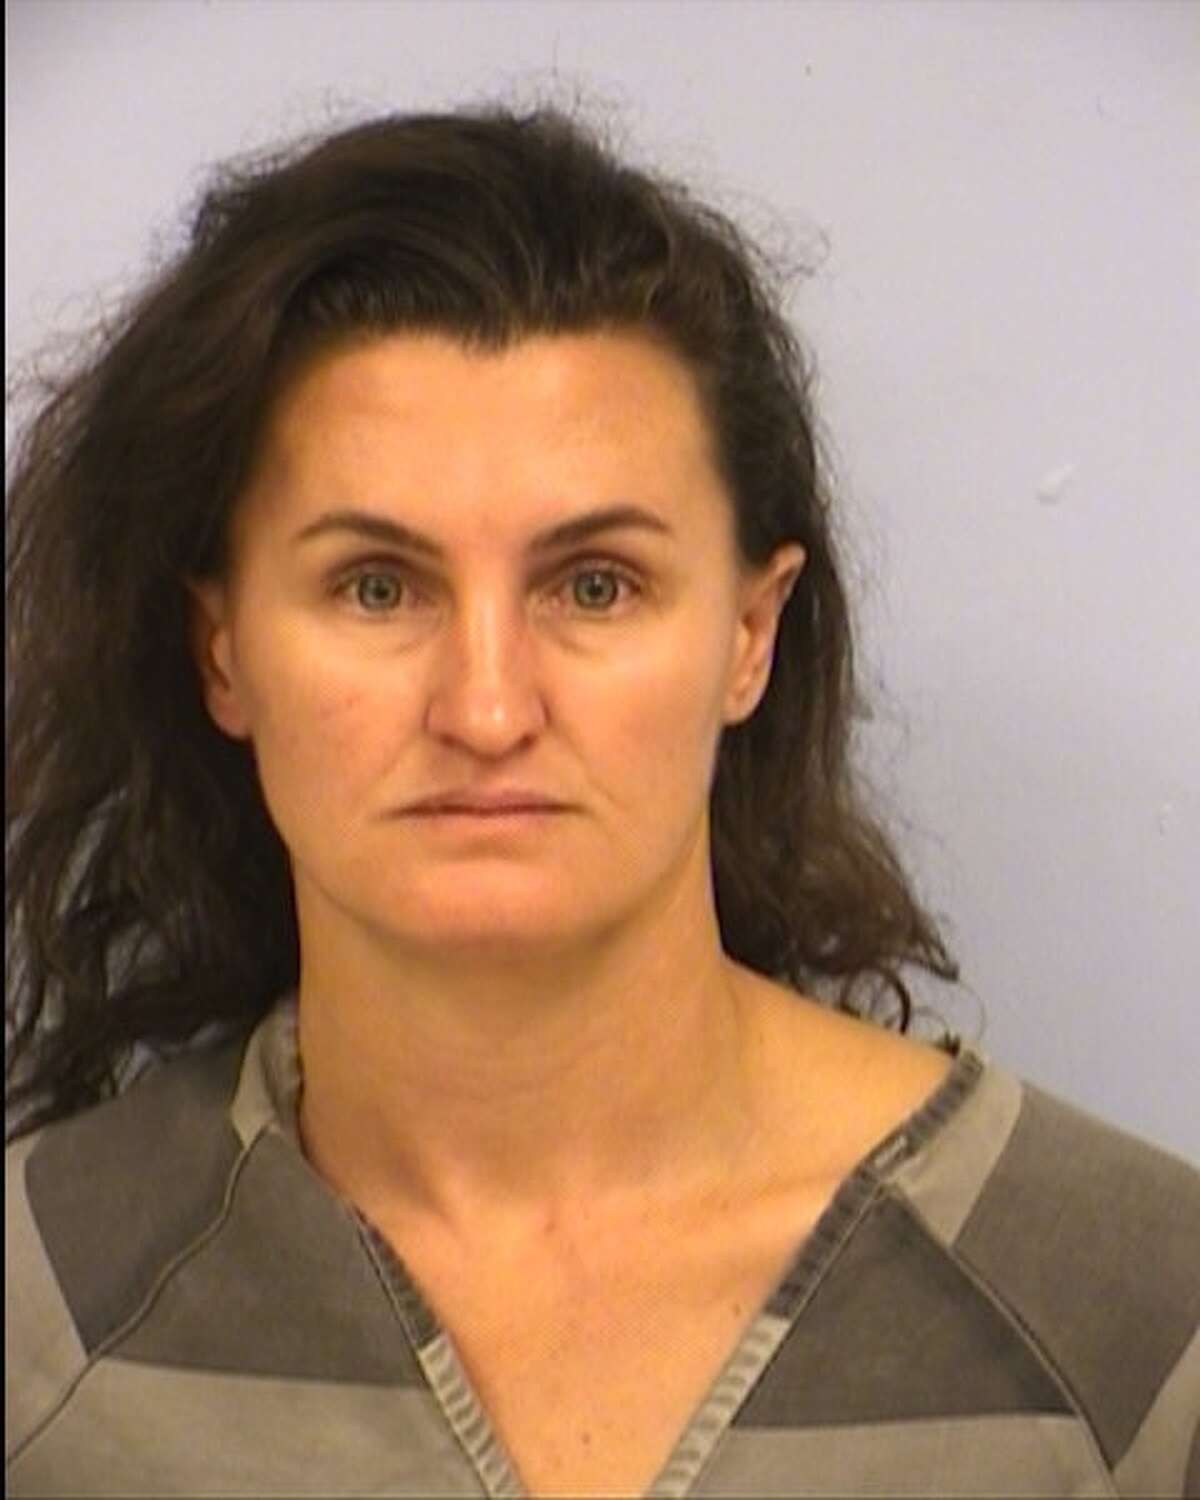 Tiffany Howard, also known as Tiffany Friesenhahn, has been charged with improper relationship between an educator and student. Howard is a former teacher and coach at Bowie High School in Austin.